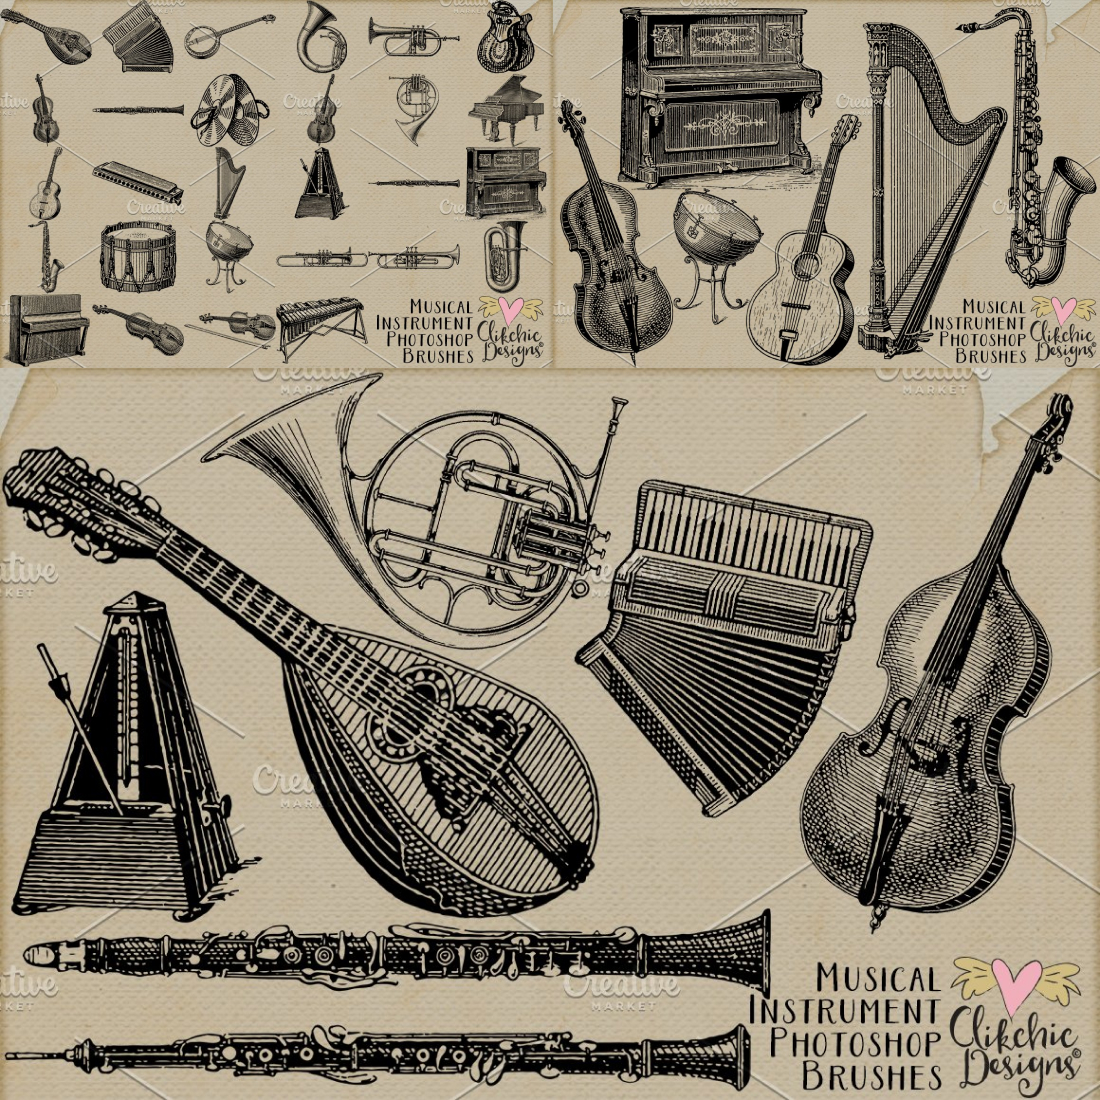 Music Instruments Photoshop Brushes cover.